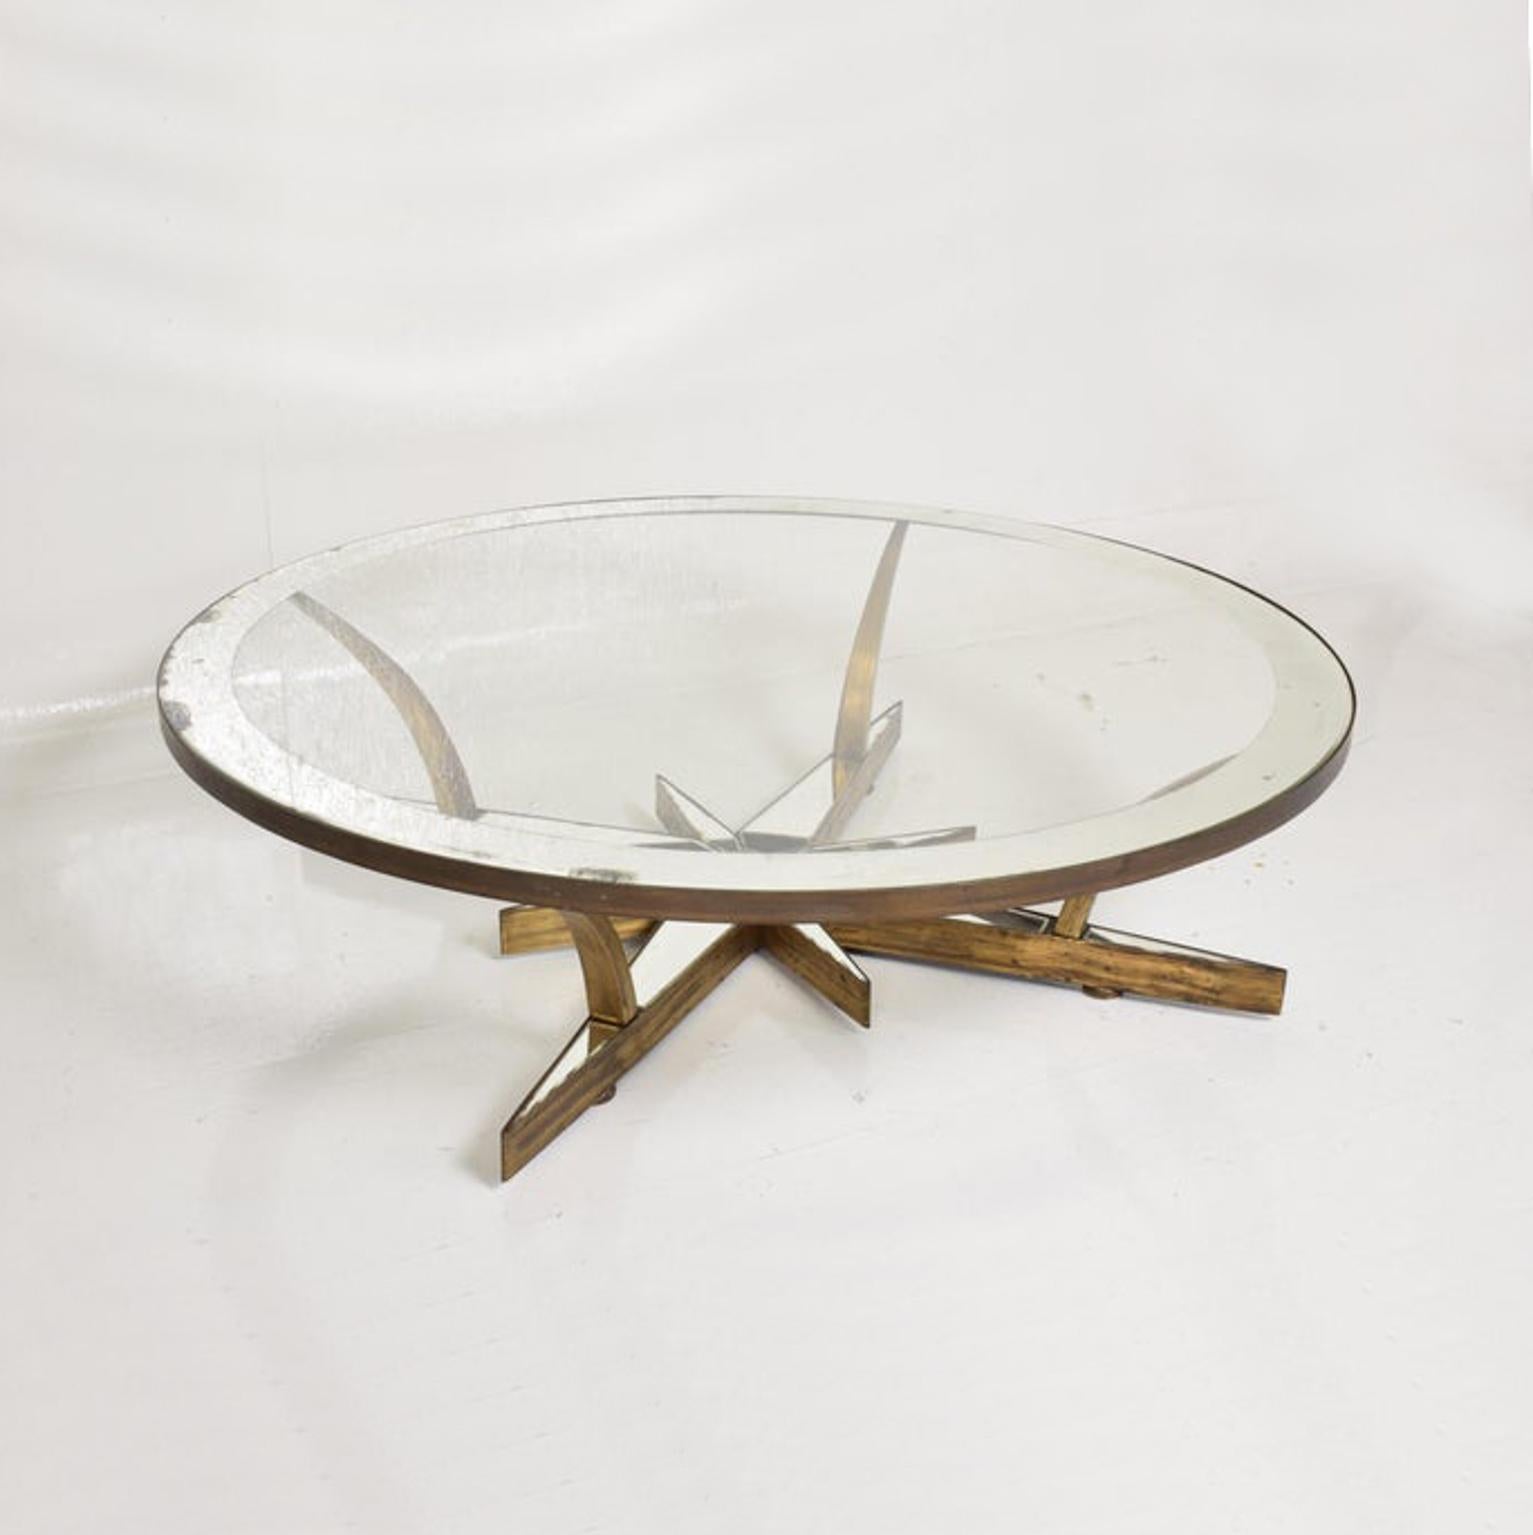 AMBIANIC presents:
Super Quality Modern STAR Coffee Cocktail Table attributed to Arturo Pani Mexico 1950s.
In Heavy Glass and Brass.
Designed with spectacular center base STAR symbol. Show stopping statement.
Unmarked.
Original antique mirror